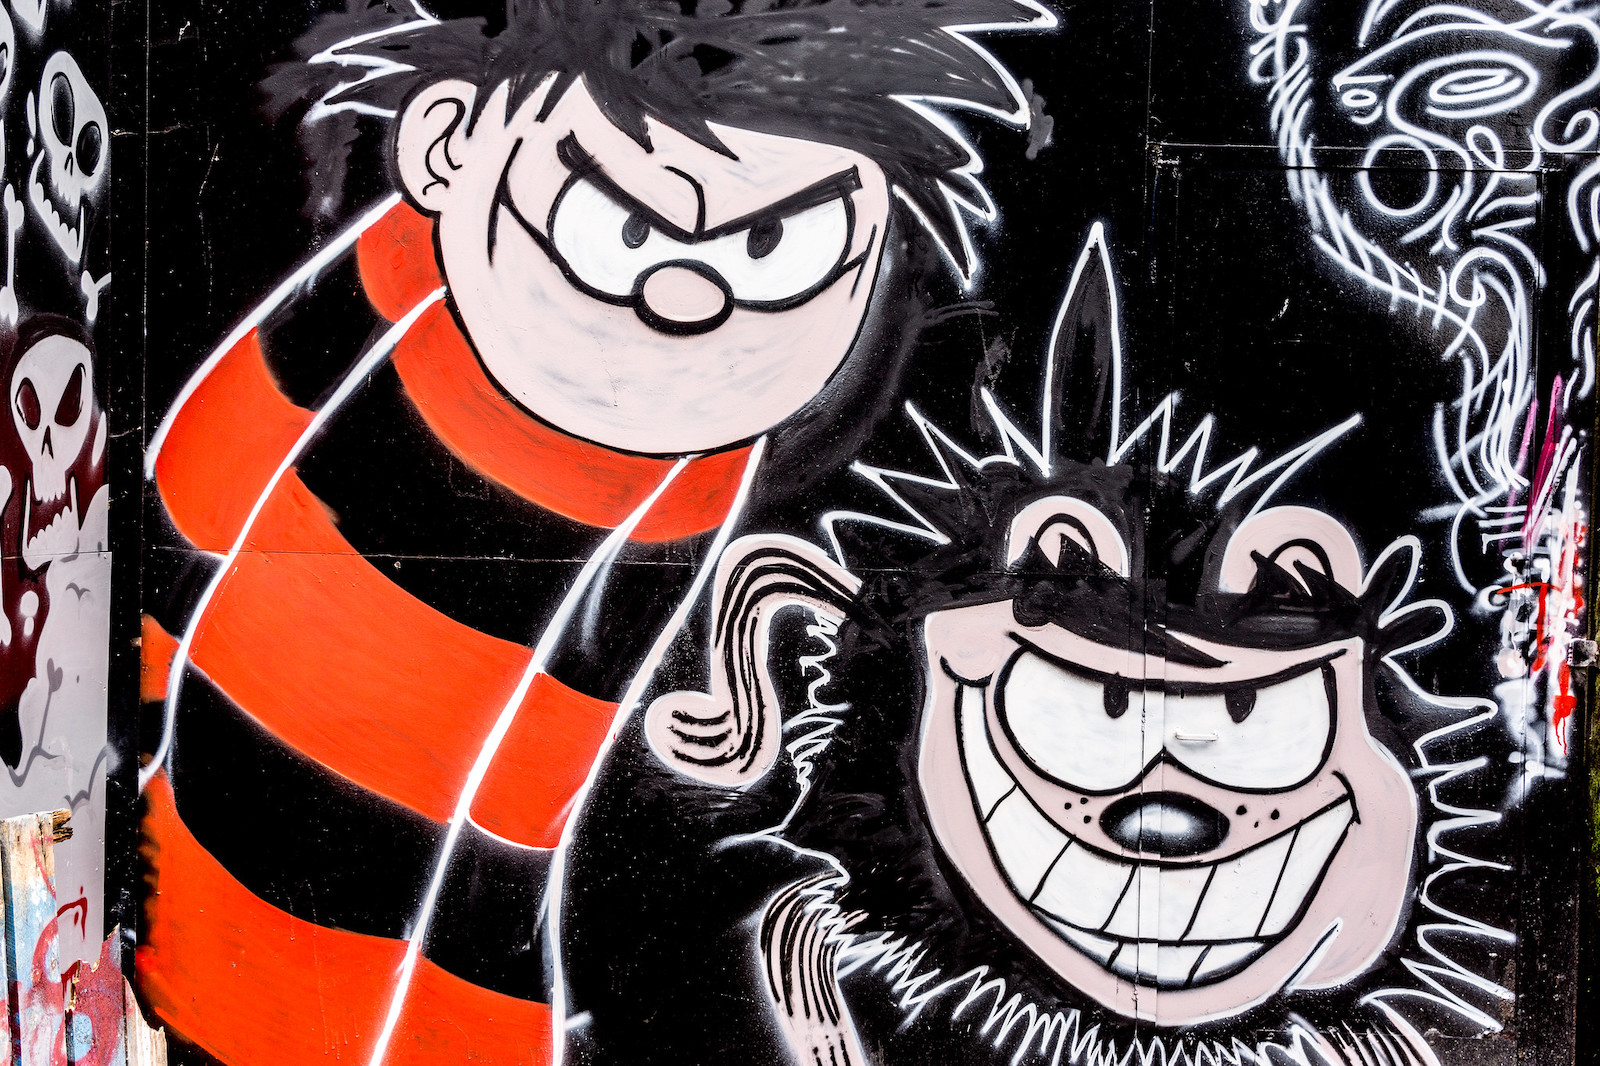 Dennis the Menace and Gnasher street art in Cabra, Ireland. William Murphy (CC BY-SA 2.0).